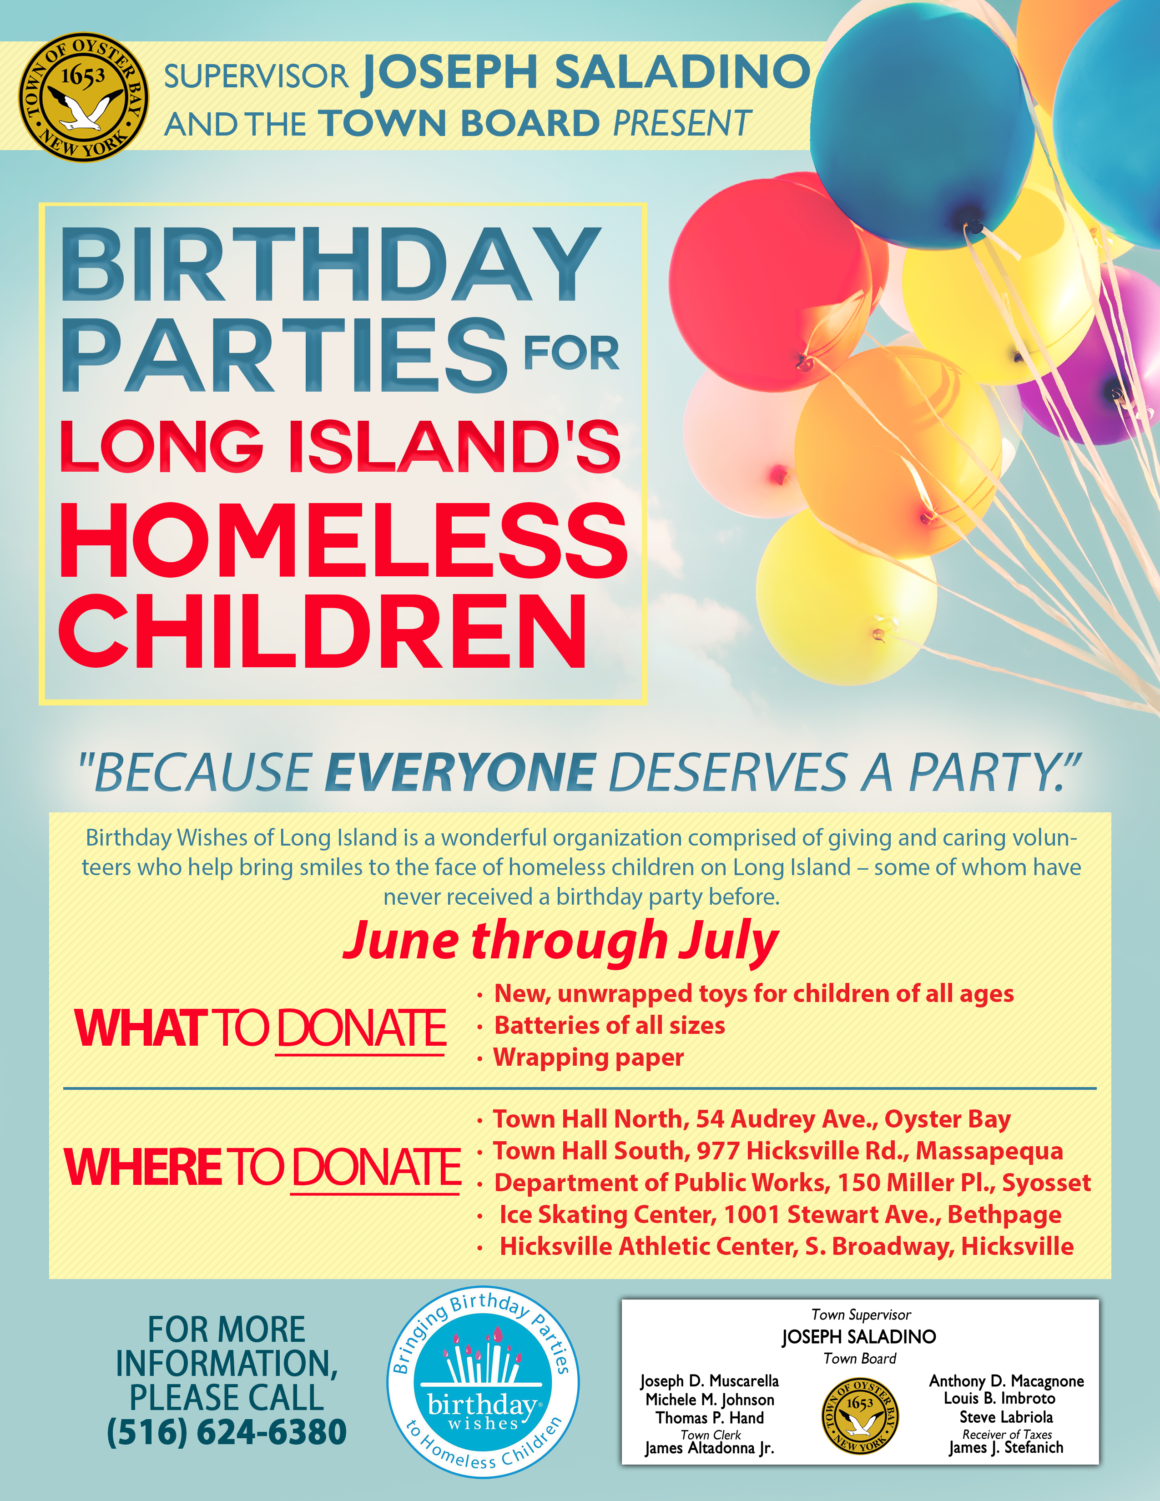 Collection Drive to Support Birthday Parties for LI’s Homeless Children